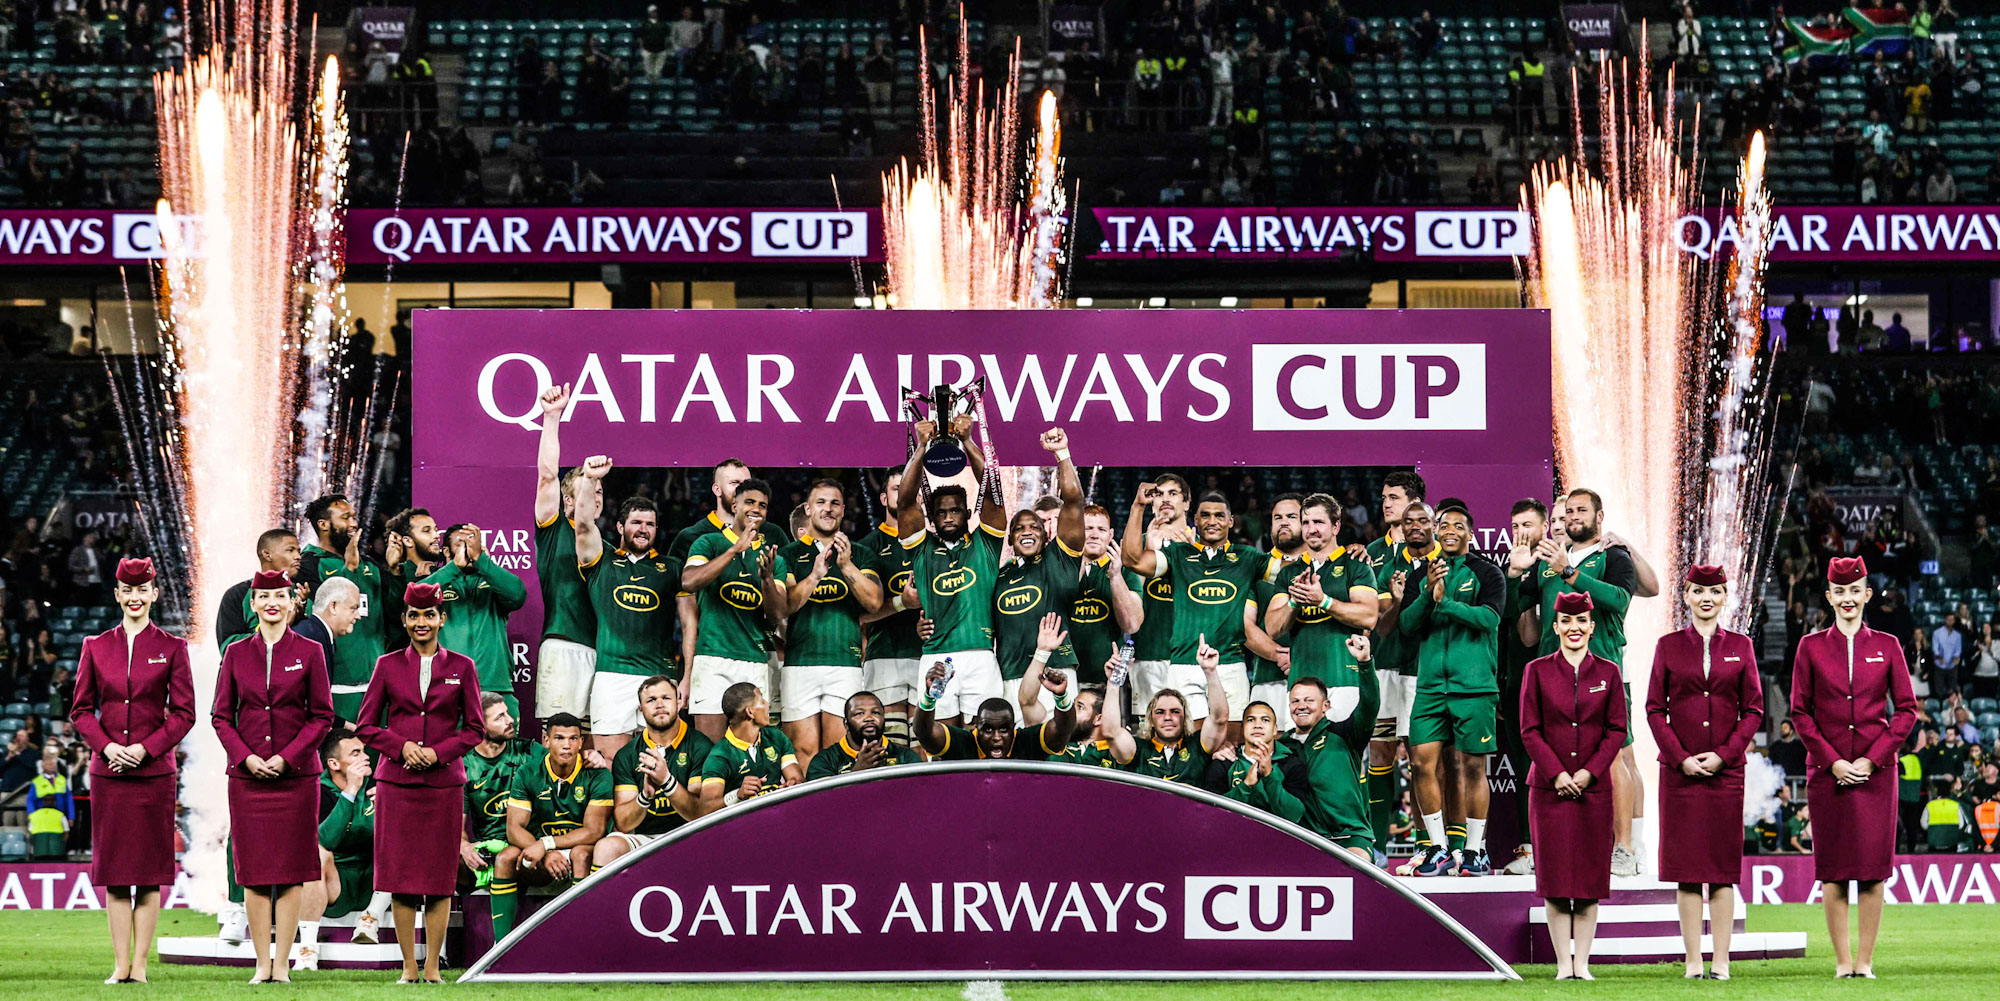 The Springboks beat the All Blacks in London last year to lift the Qatar Airways Cup.